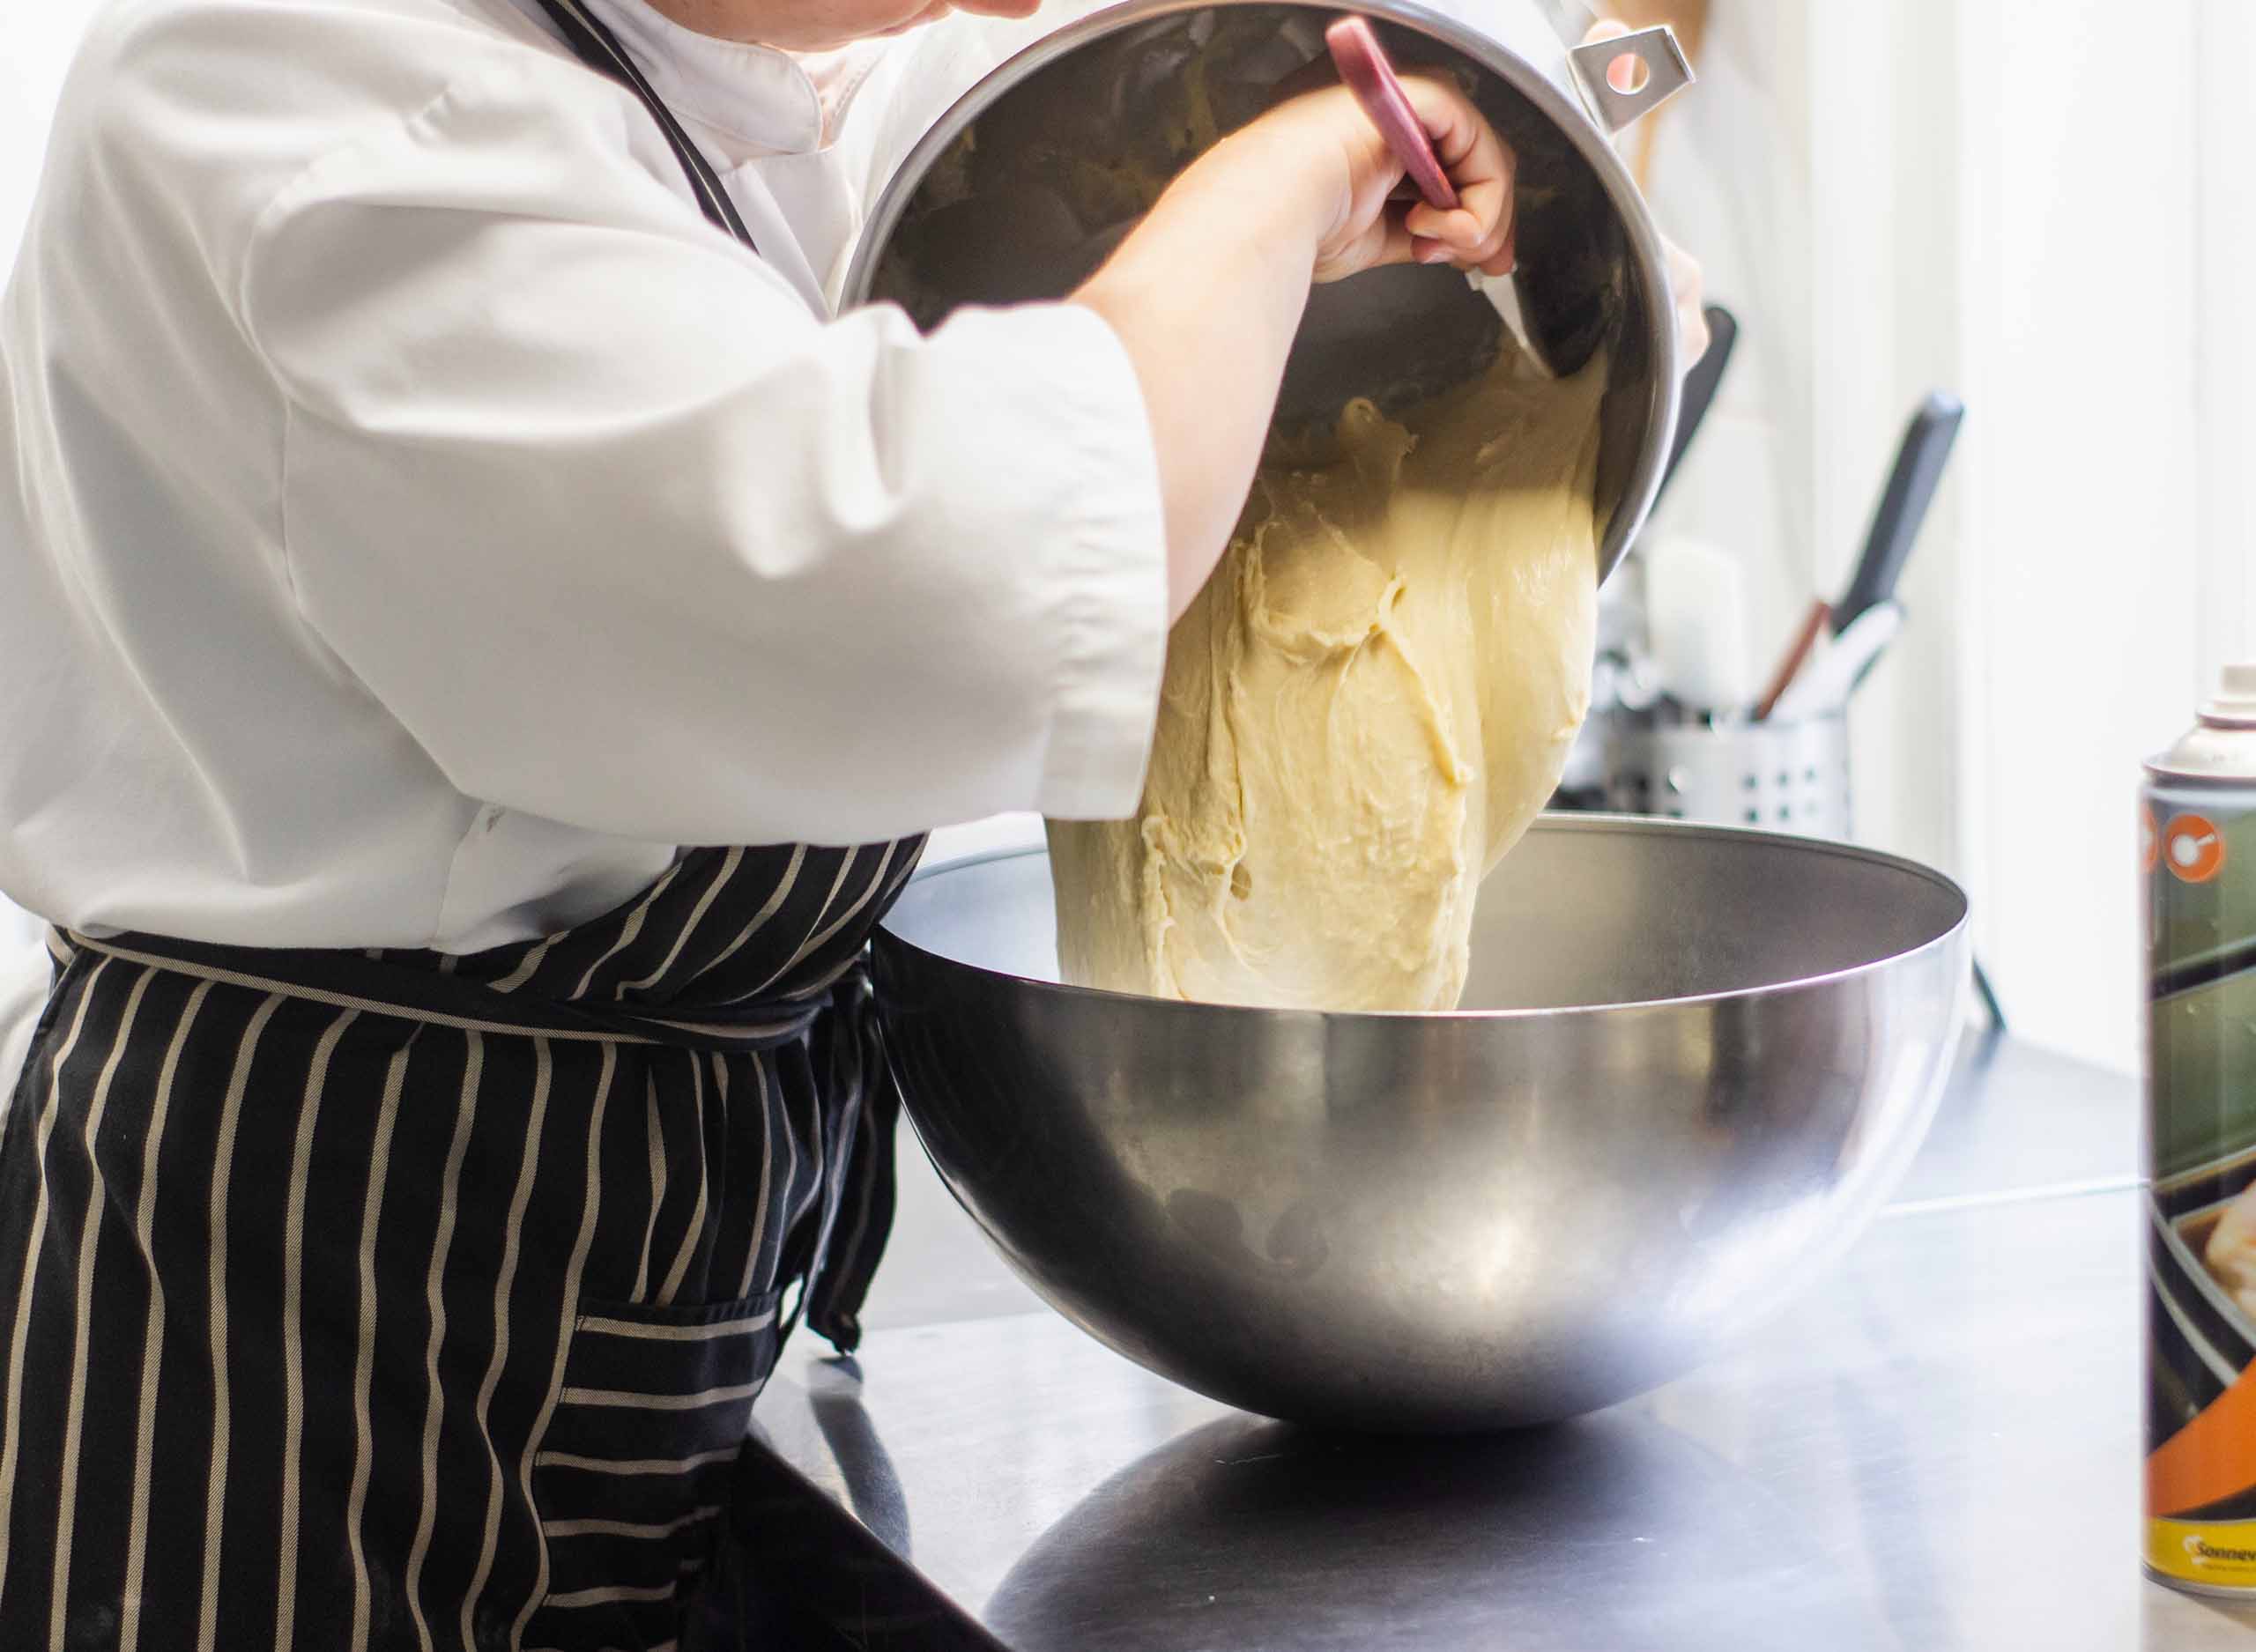 A pastry chef transferring a large amount of dough to a shiny stainless steel bowl.